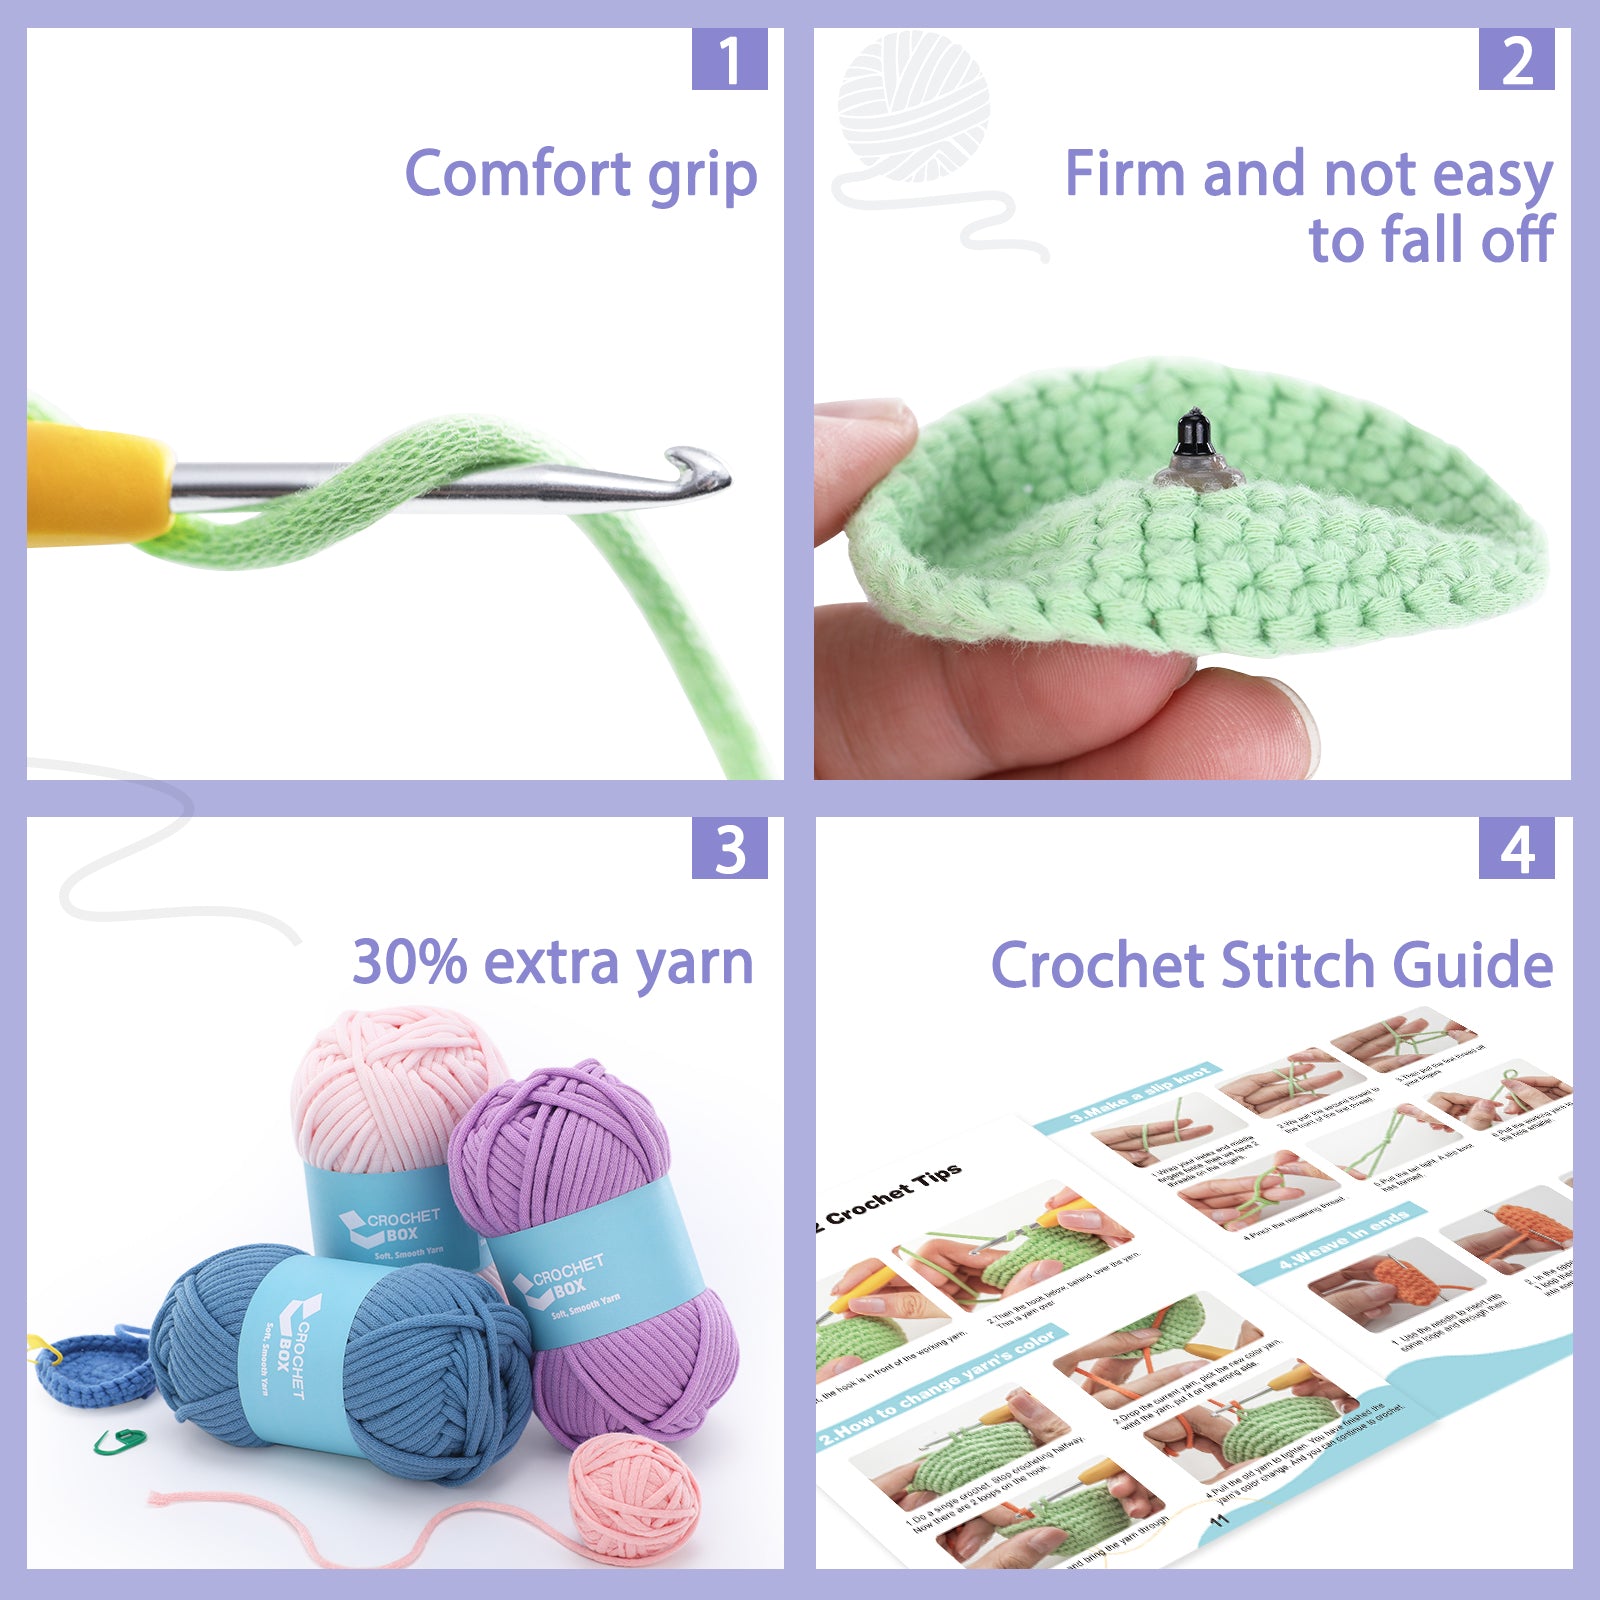 Complete Crochet Kit for Beginners: Starter Crochet Kit, All Need in, Includes Easy Crocheting Soft Yarn, Step-by-Step Video Tutorial, Ghost & Bat Design, Birthday, Holiday Gift for Adults, Teens